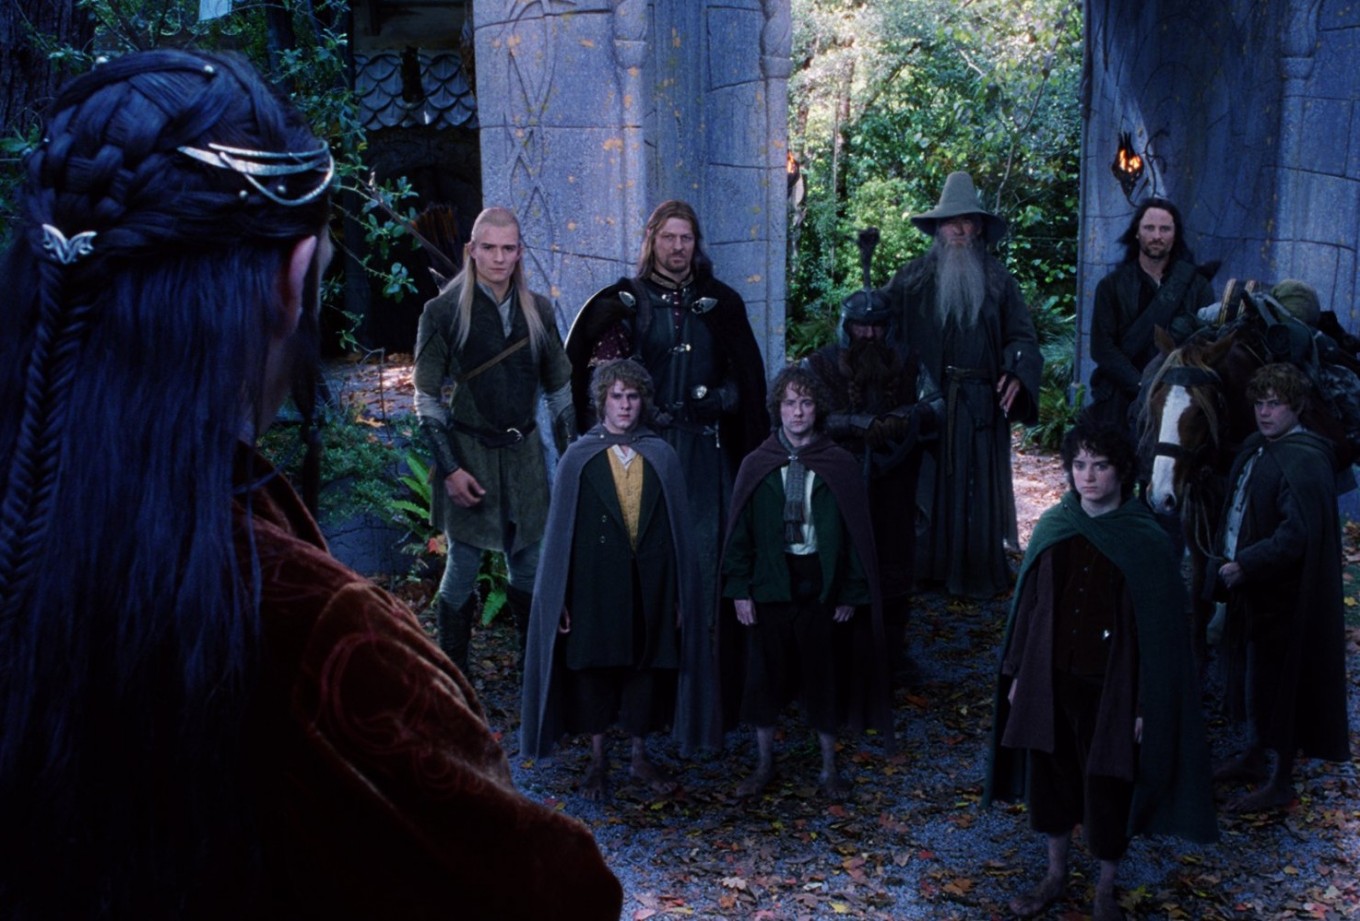 Lord of the Rings' movie series in the works at Warner Bros.